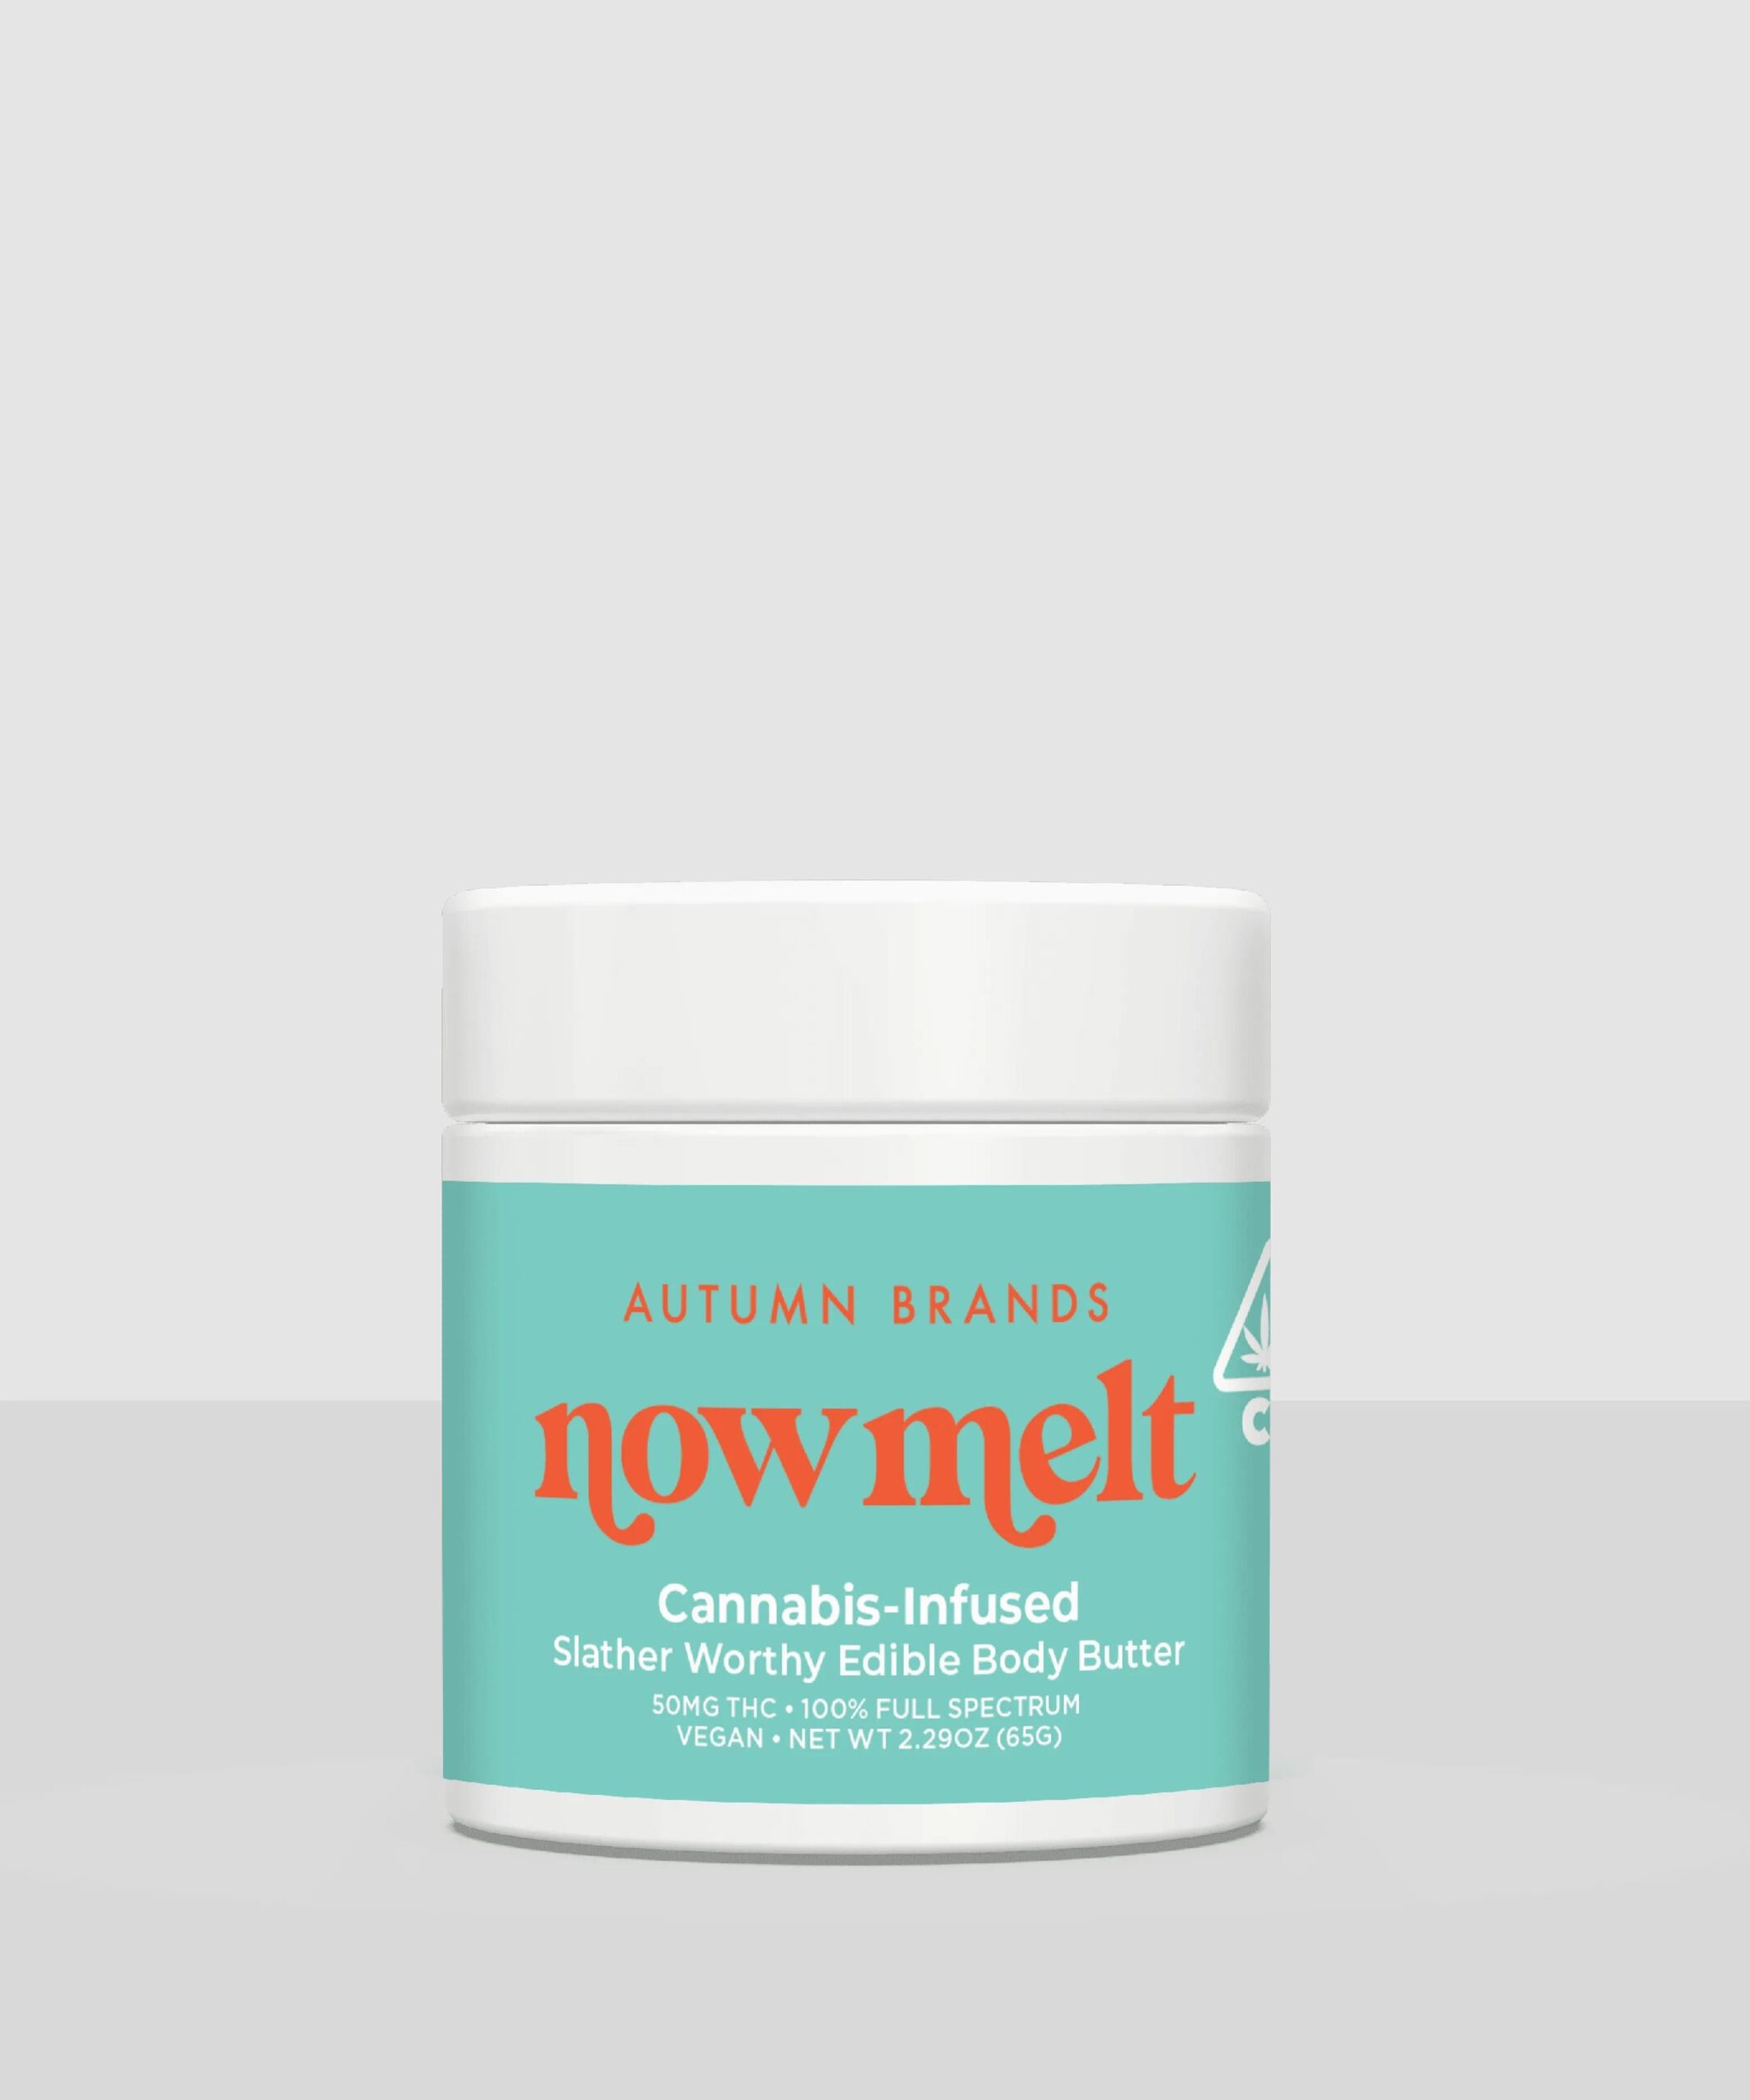 Body Butter Benefits: Our Slather Worthy Body Butter is a Must-Have